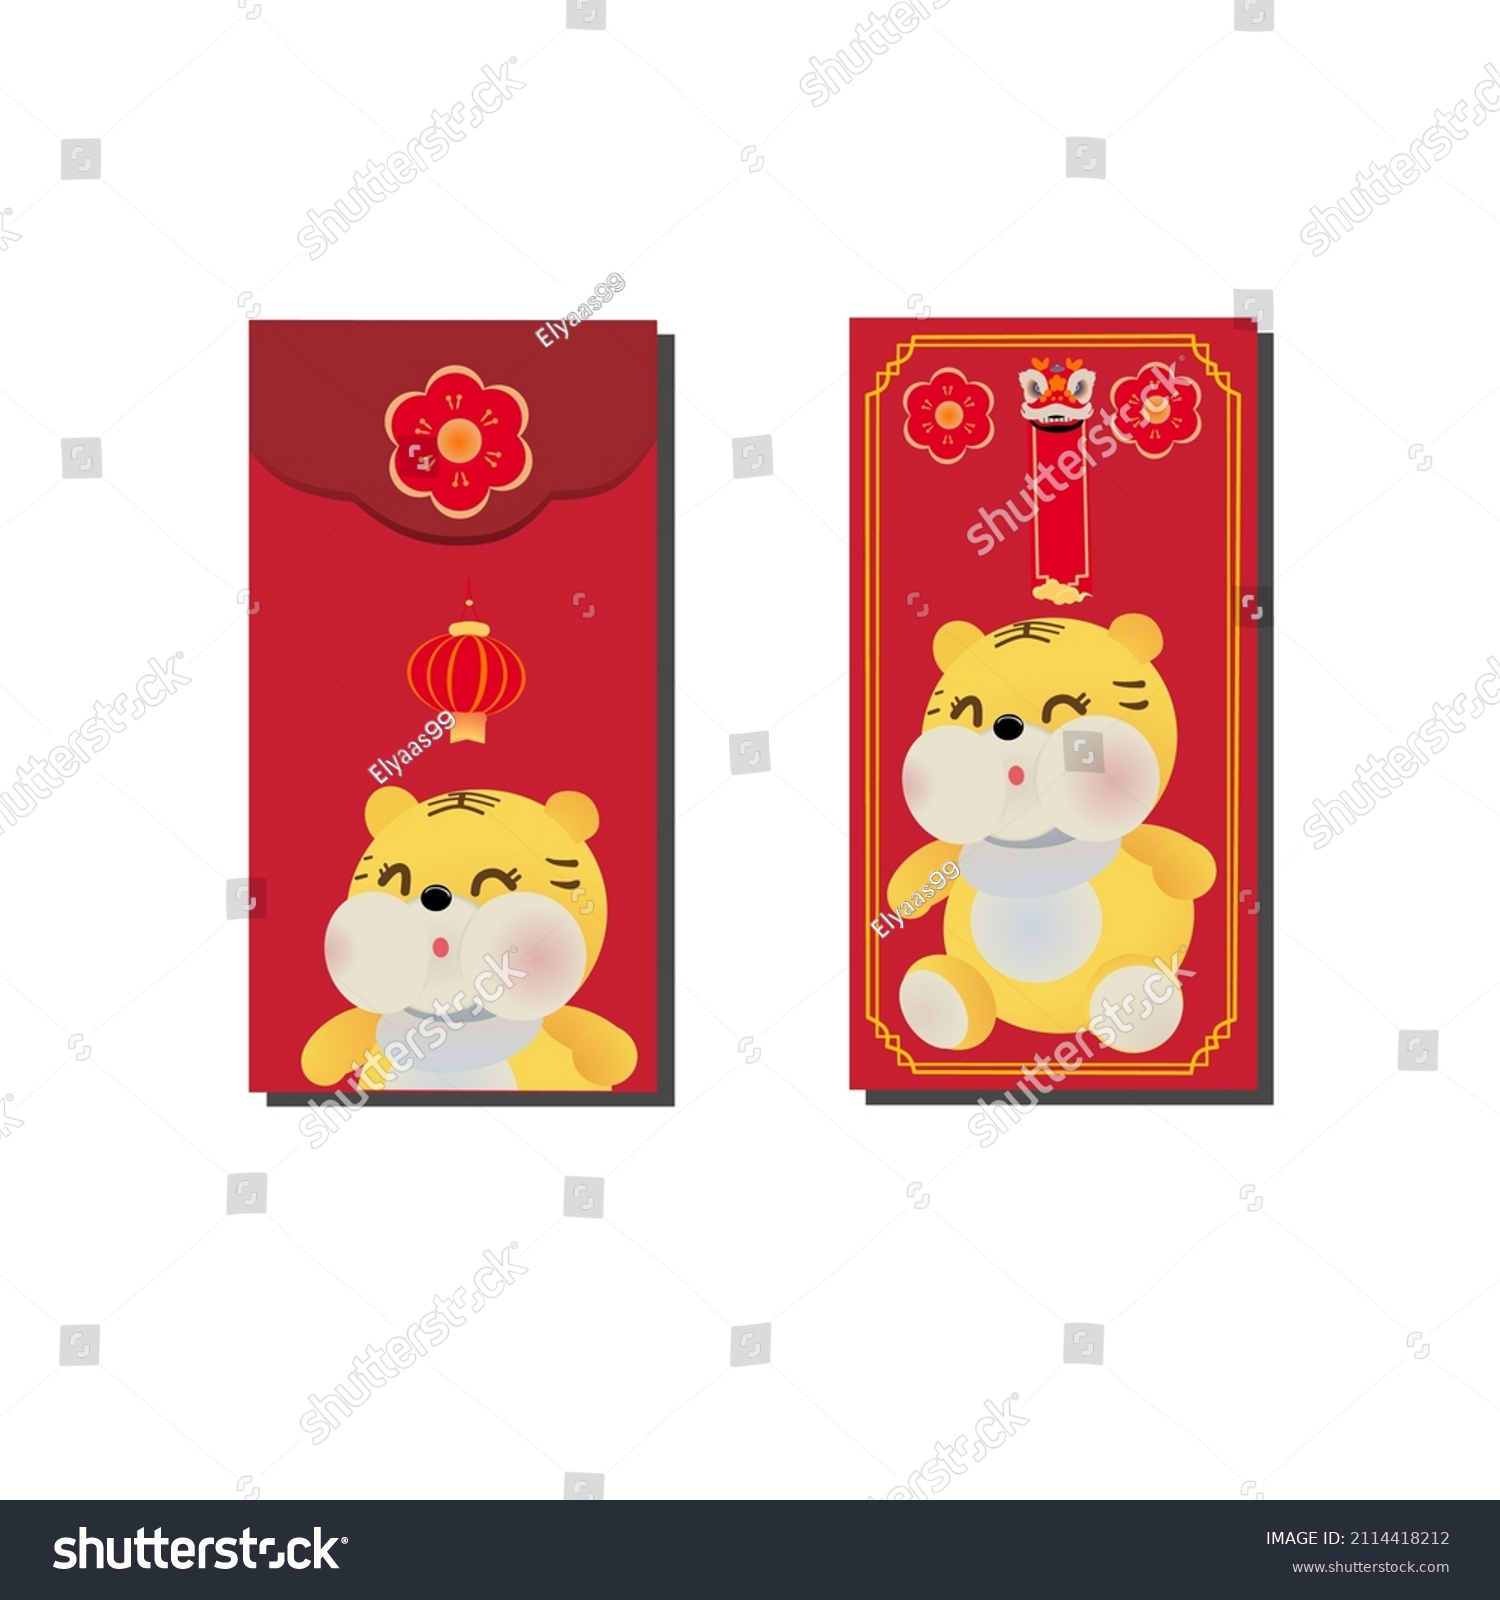 SVG of vector illustration, chinese new year envelope gift, with tiger drawing svg